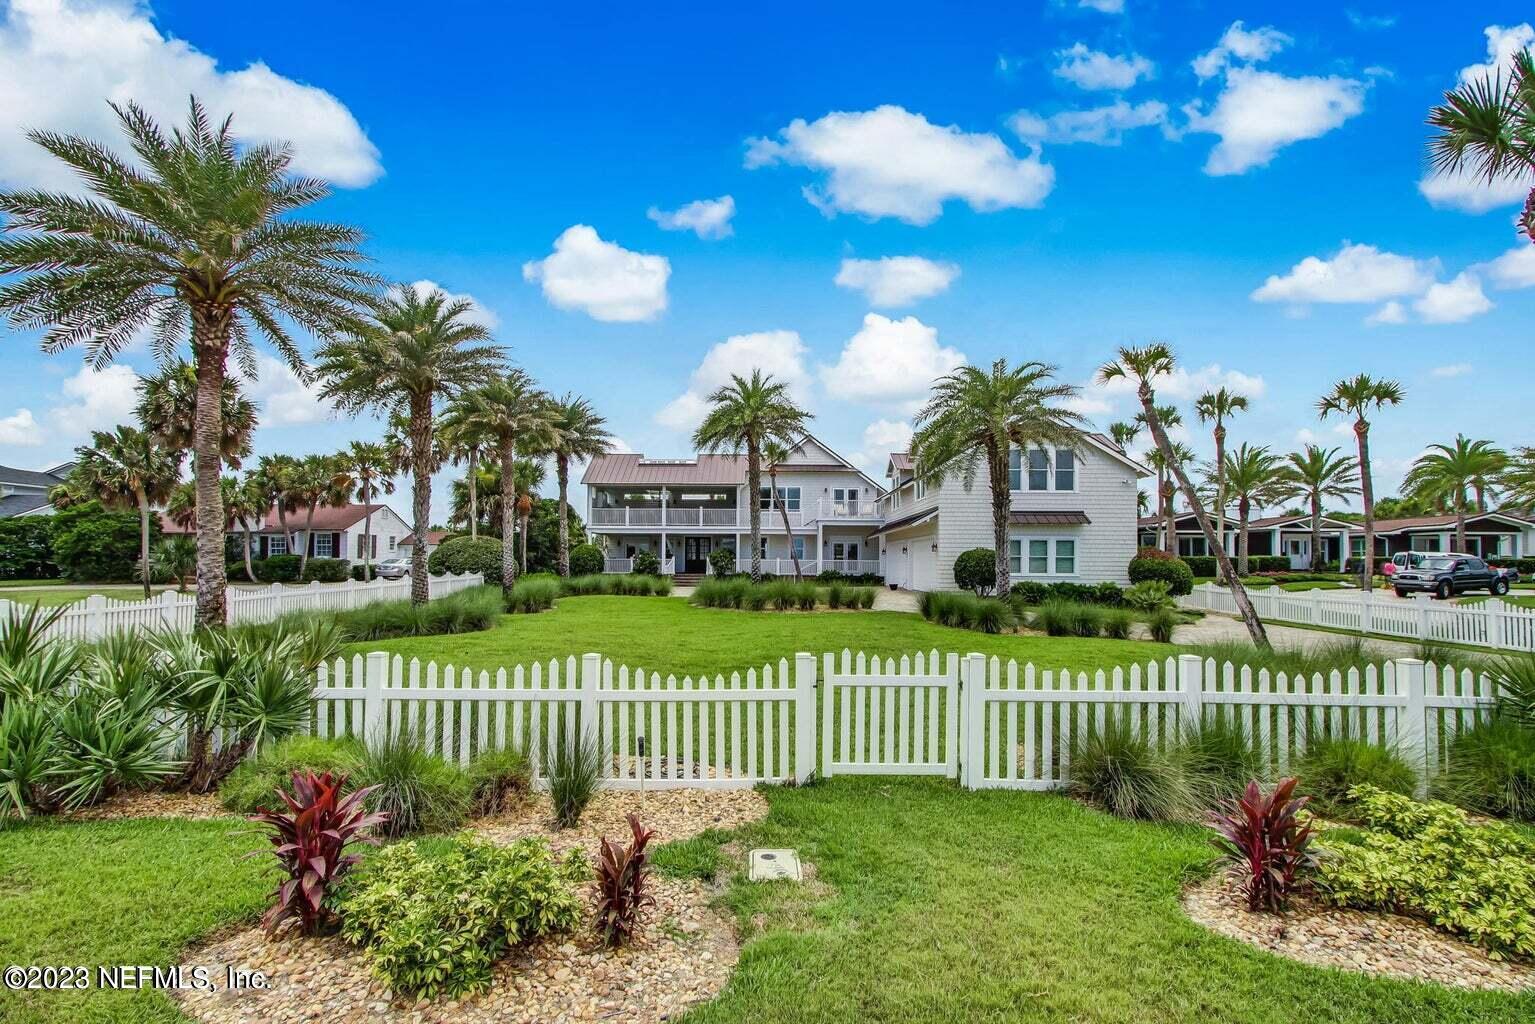 Ponte Vedra Beach, FL home for sale located at 514 Ponte Vedra Boulevard, Ponte Vedra Beach, FL 32082